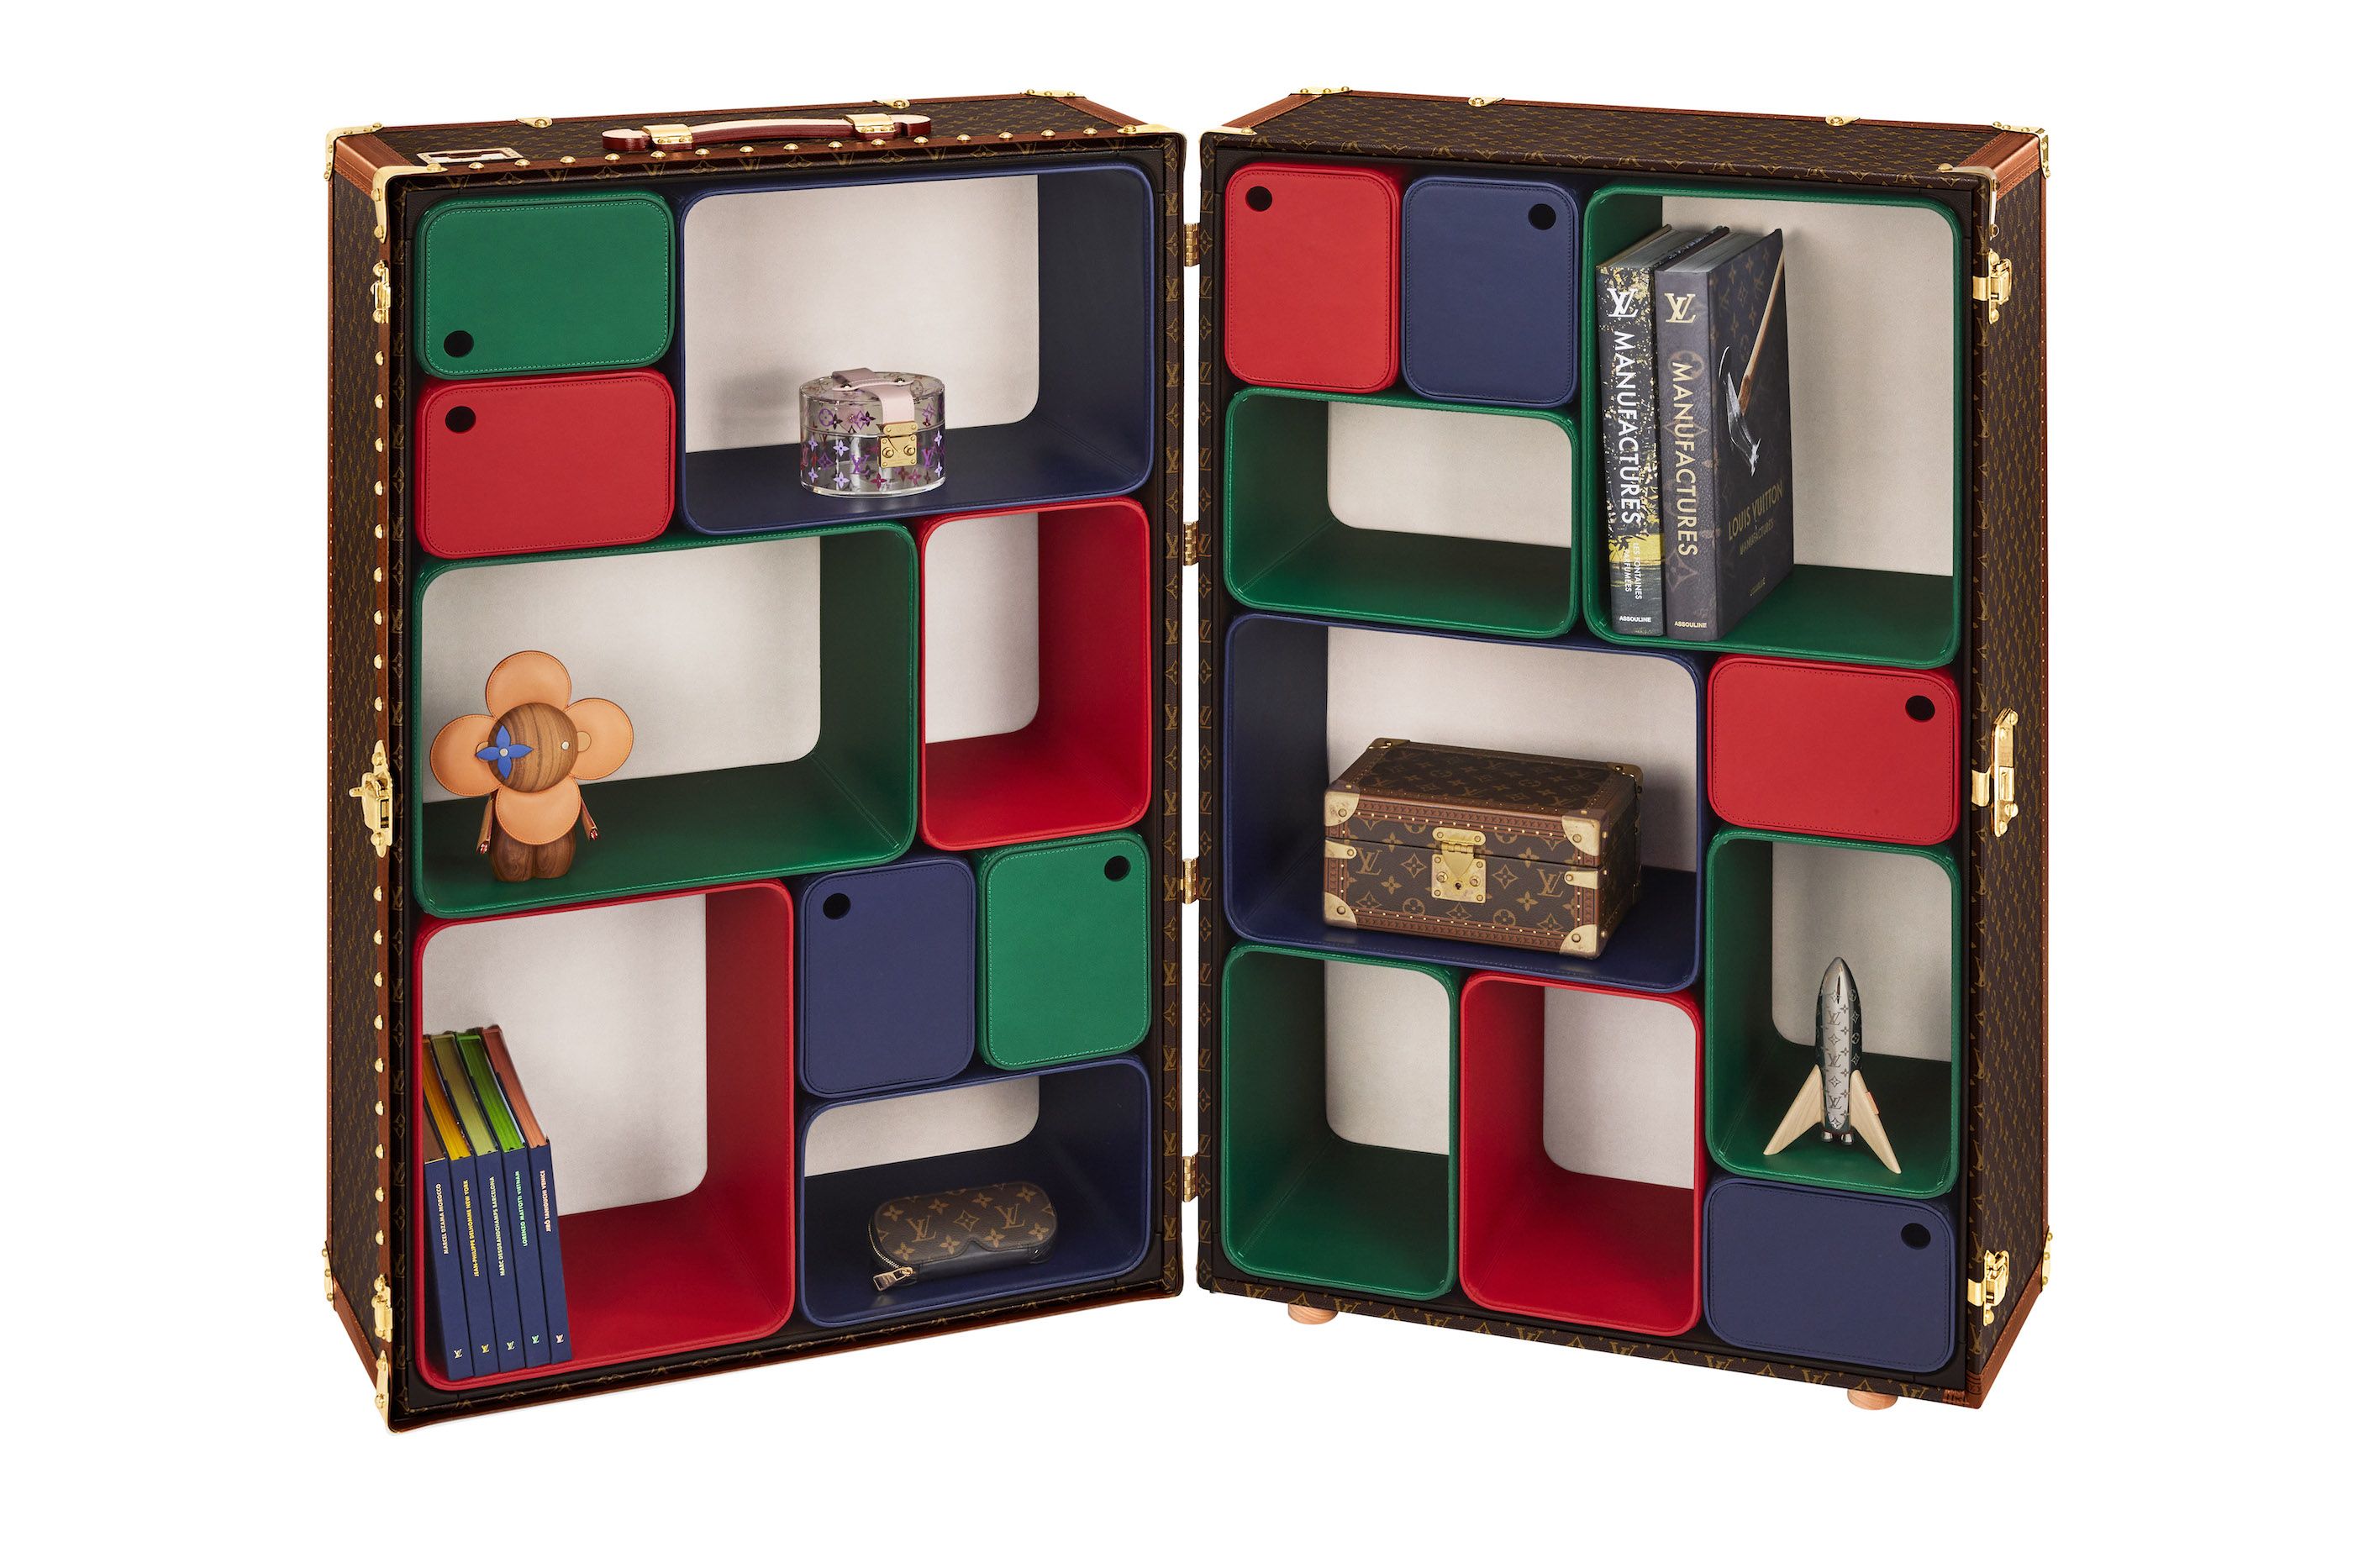 Louis Vuitton's Cabinet of Curiosities by Marc Newson